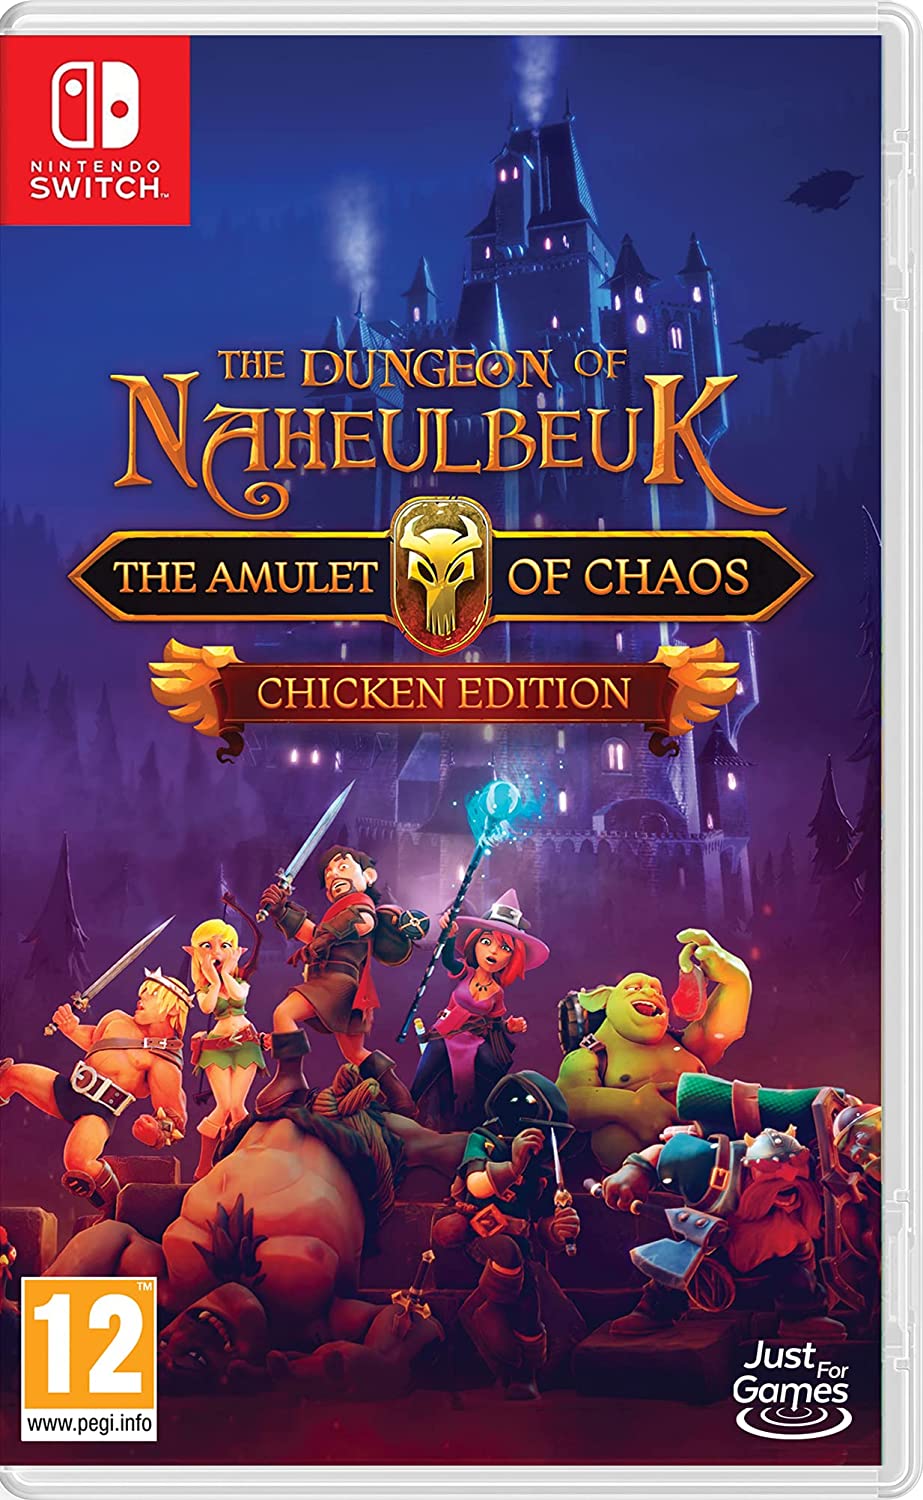 The Dungeon Of Naheulbeuk: The Amulet Of Chaos - Chicken Edition (Nintendo Switch)